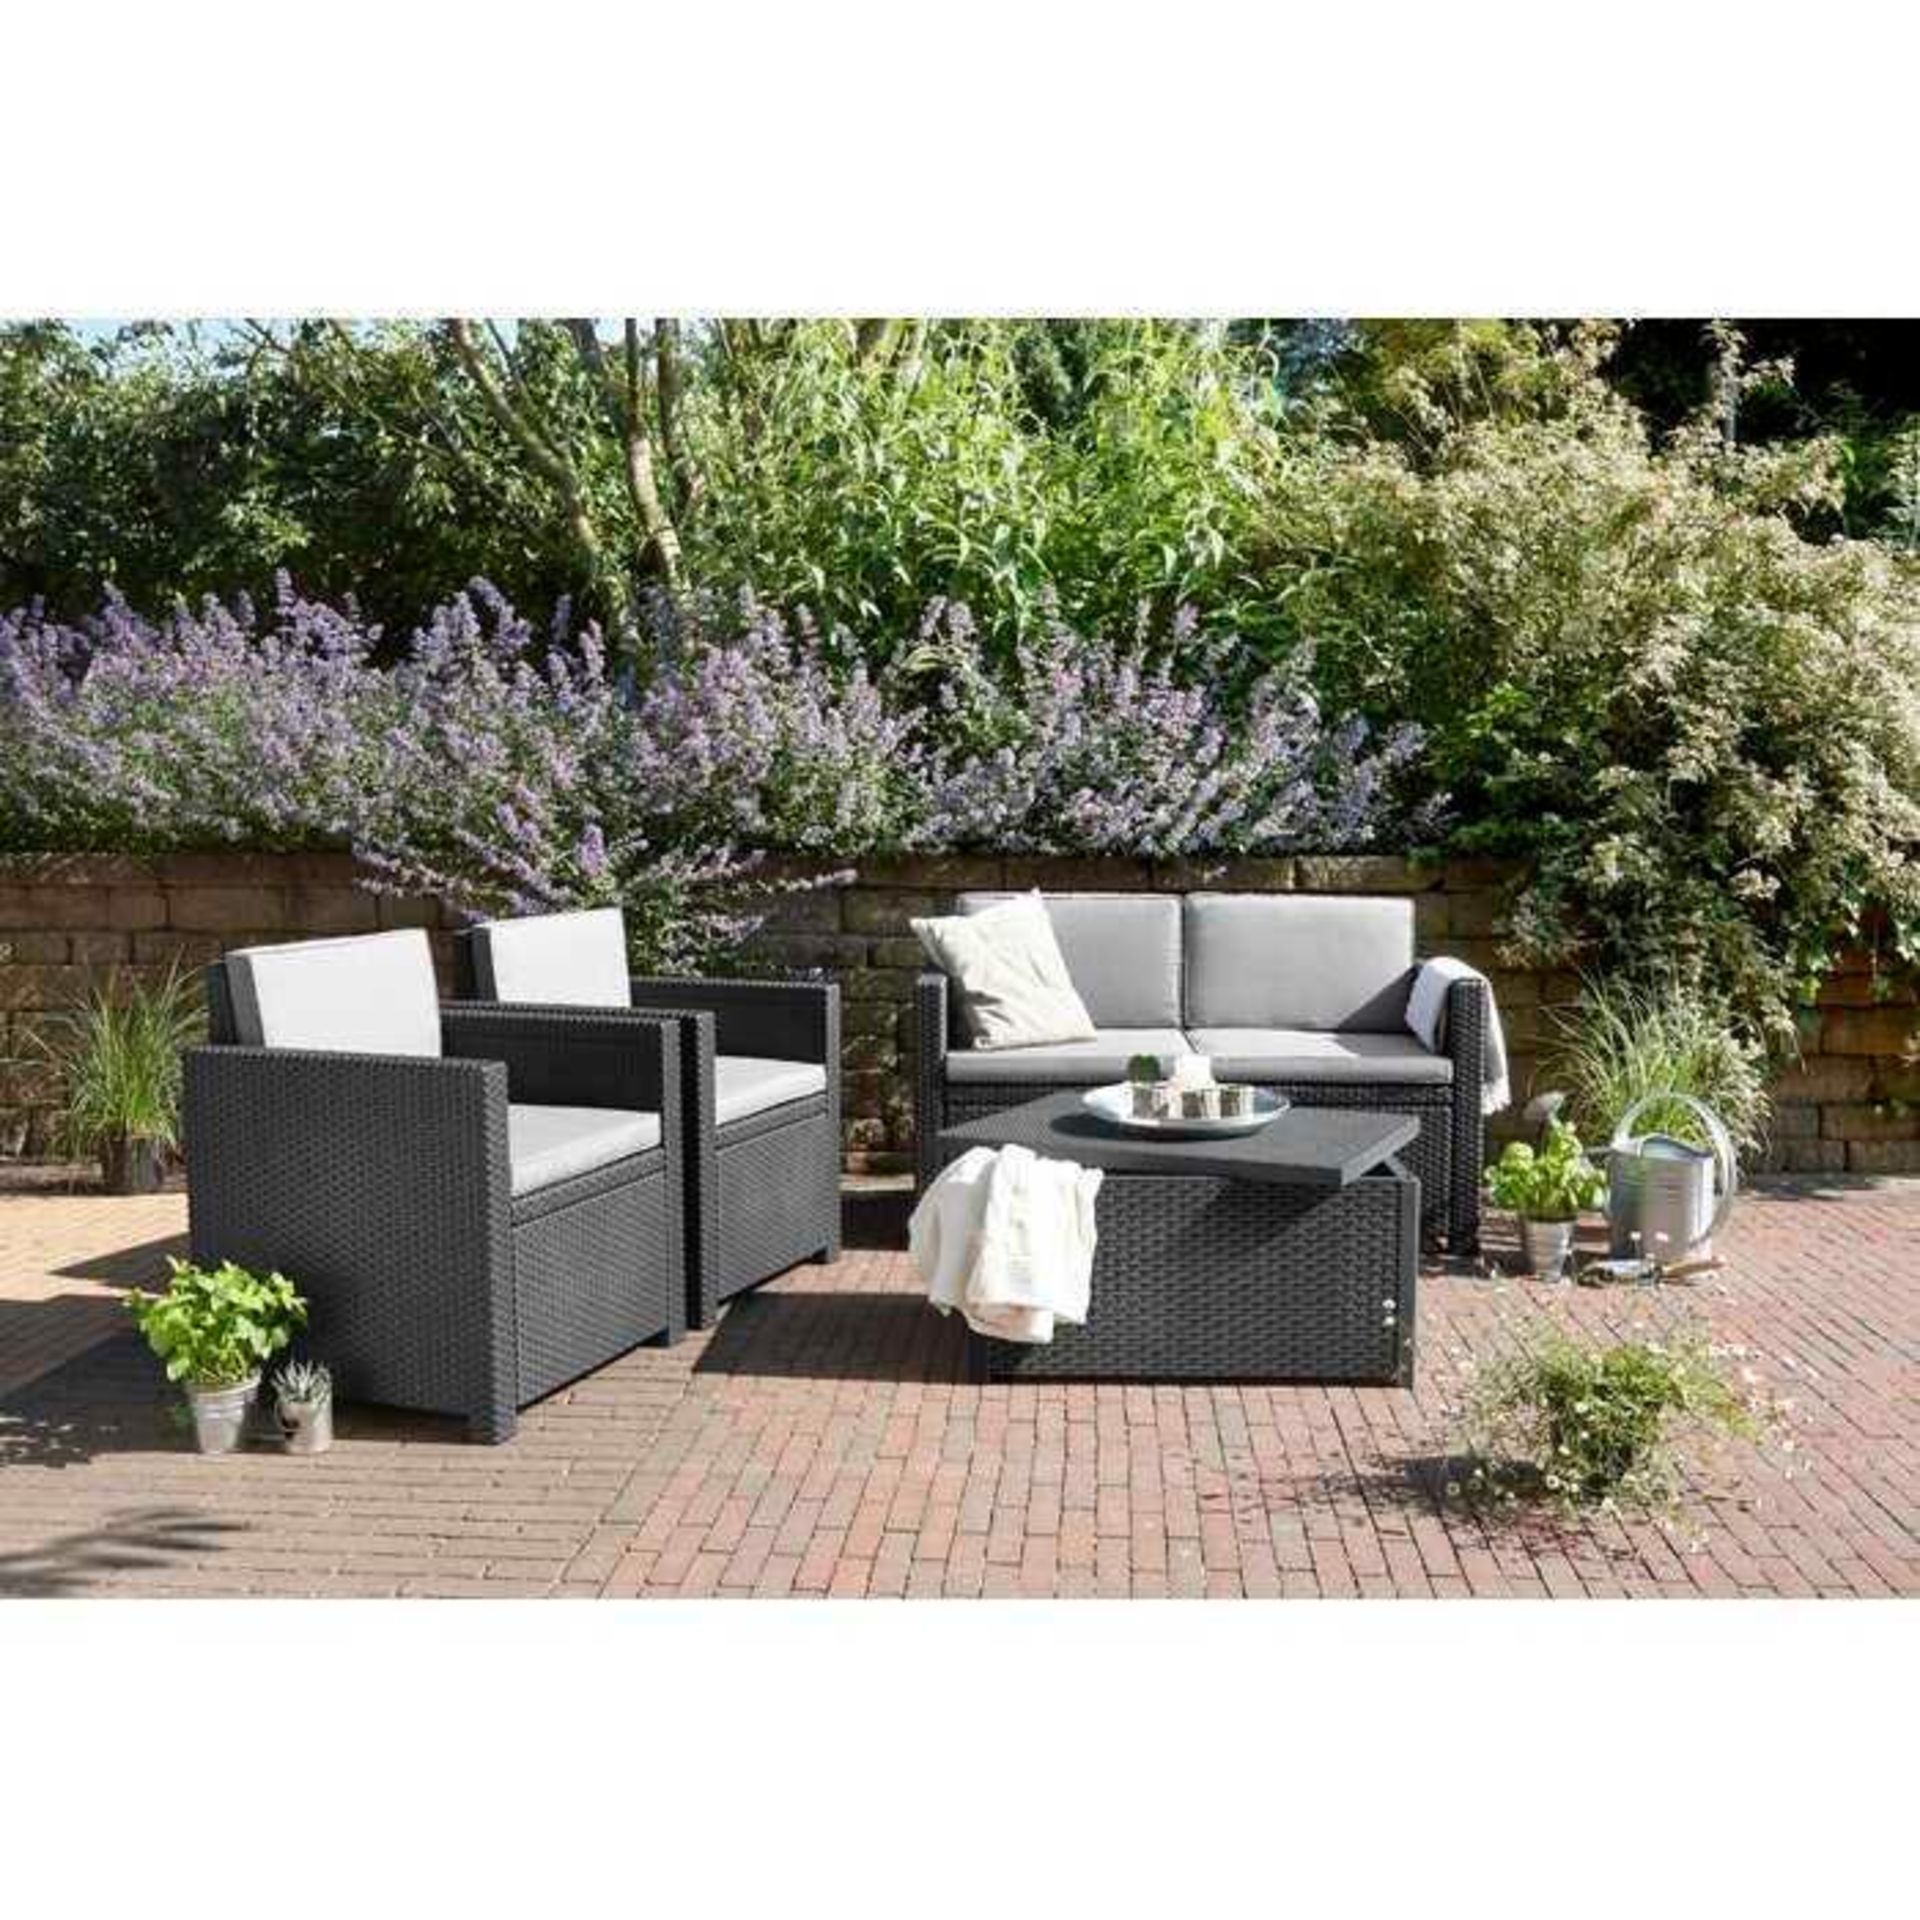 (Jm) RRP £450 Lot To Contain Rattan 4 Person Seating With Cushions